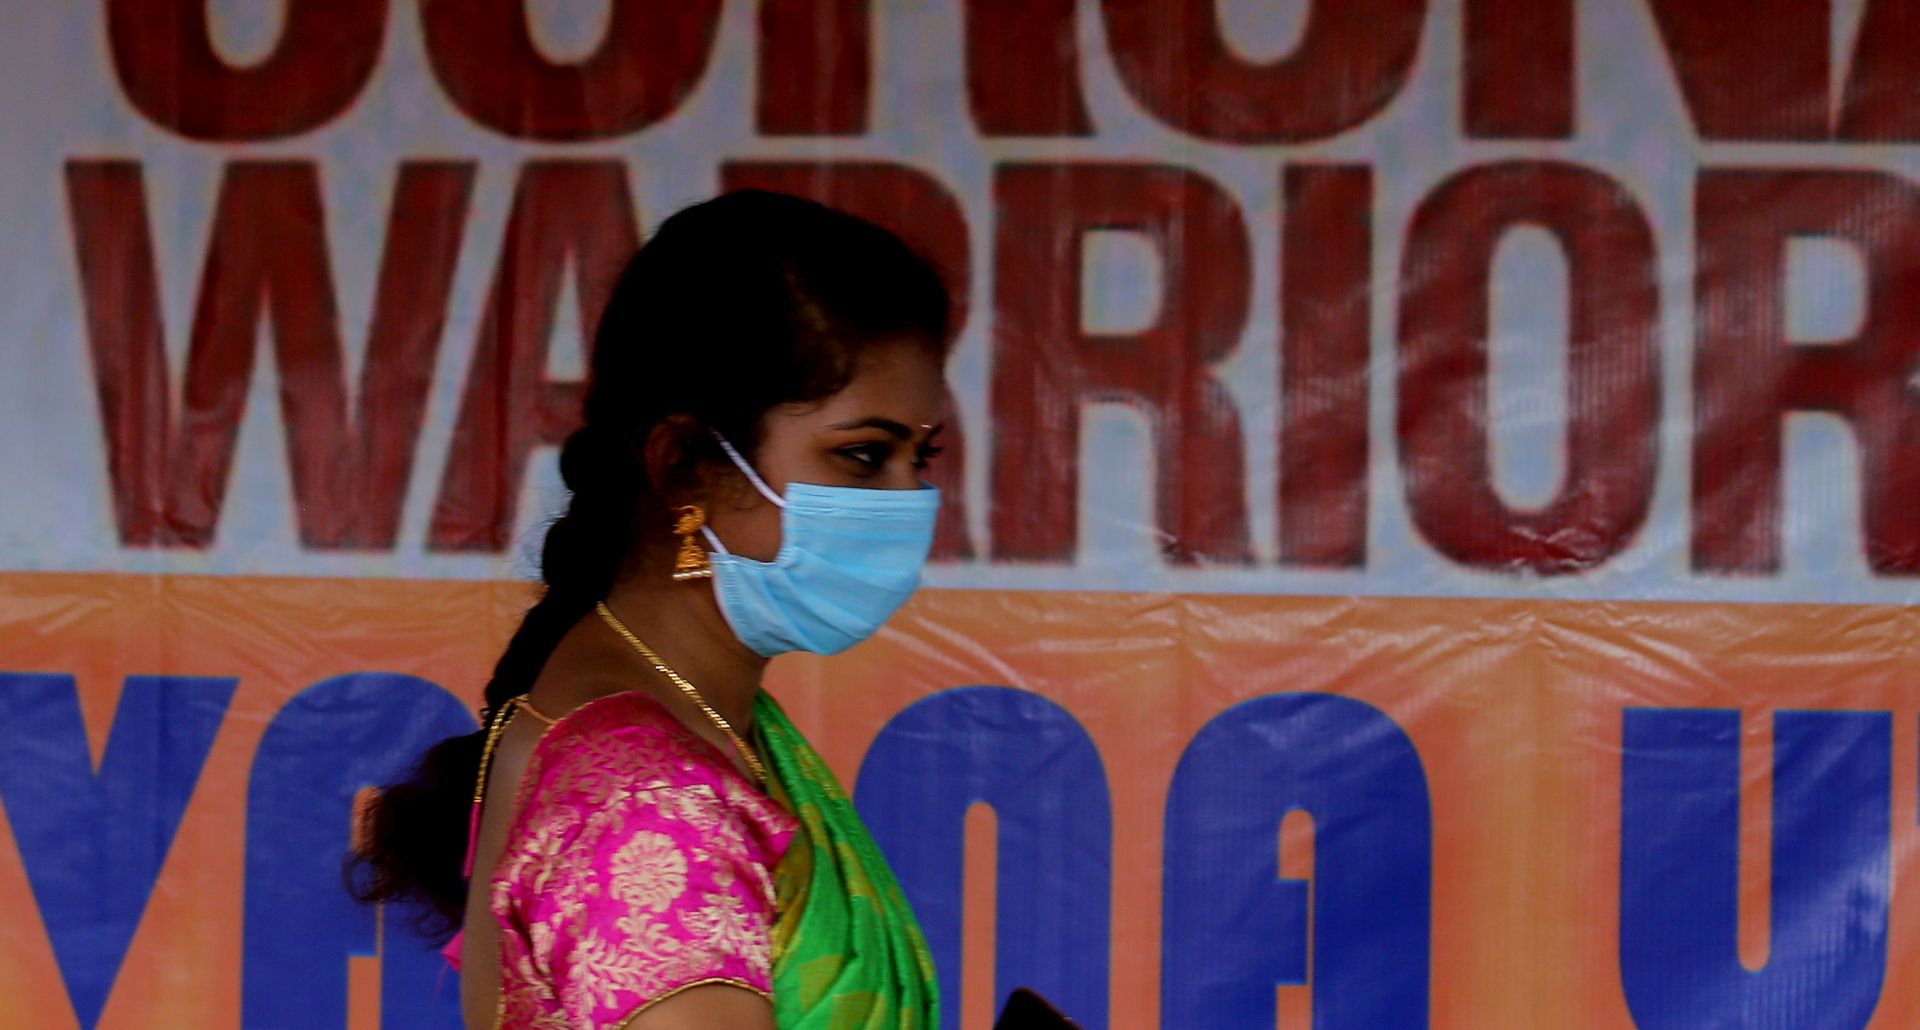 epa08603291 An Indian woman wears a face mask as a preventive measure against the Coronavirus in Bangalore, India, 14 August 2020. Countries around the world have started to ease coronavirus disease (COVID-19) lockdown restrictions in an effort to restart their economies and help people in their daily routines amid the coronavirus pandemic.  EPA/JAGADEESH NV